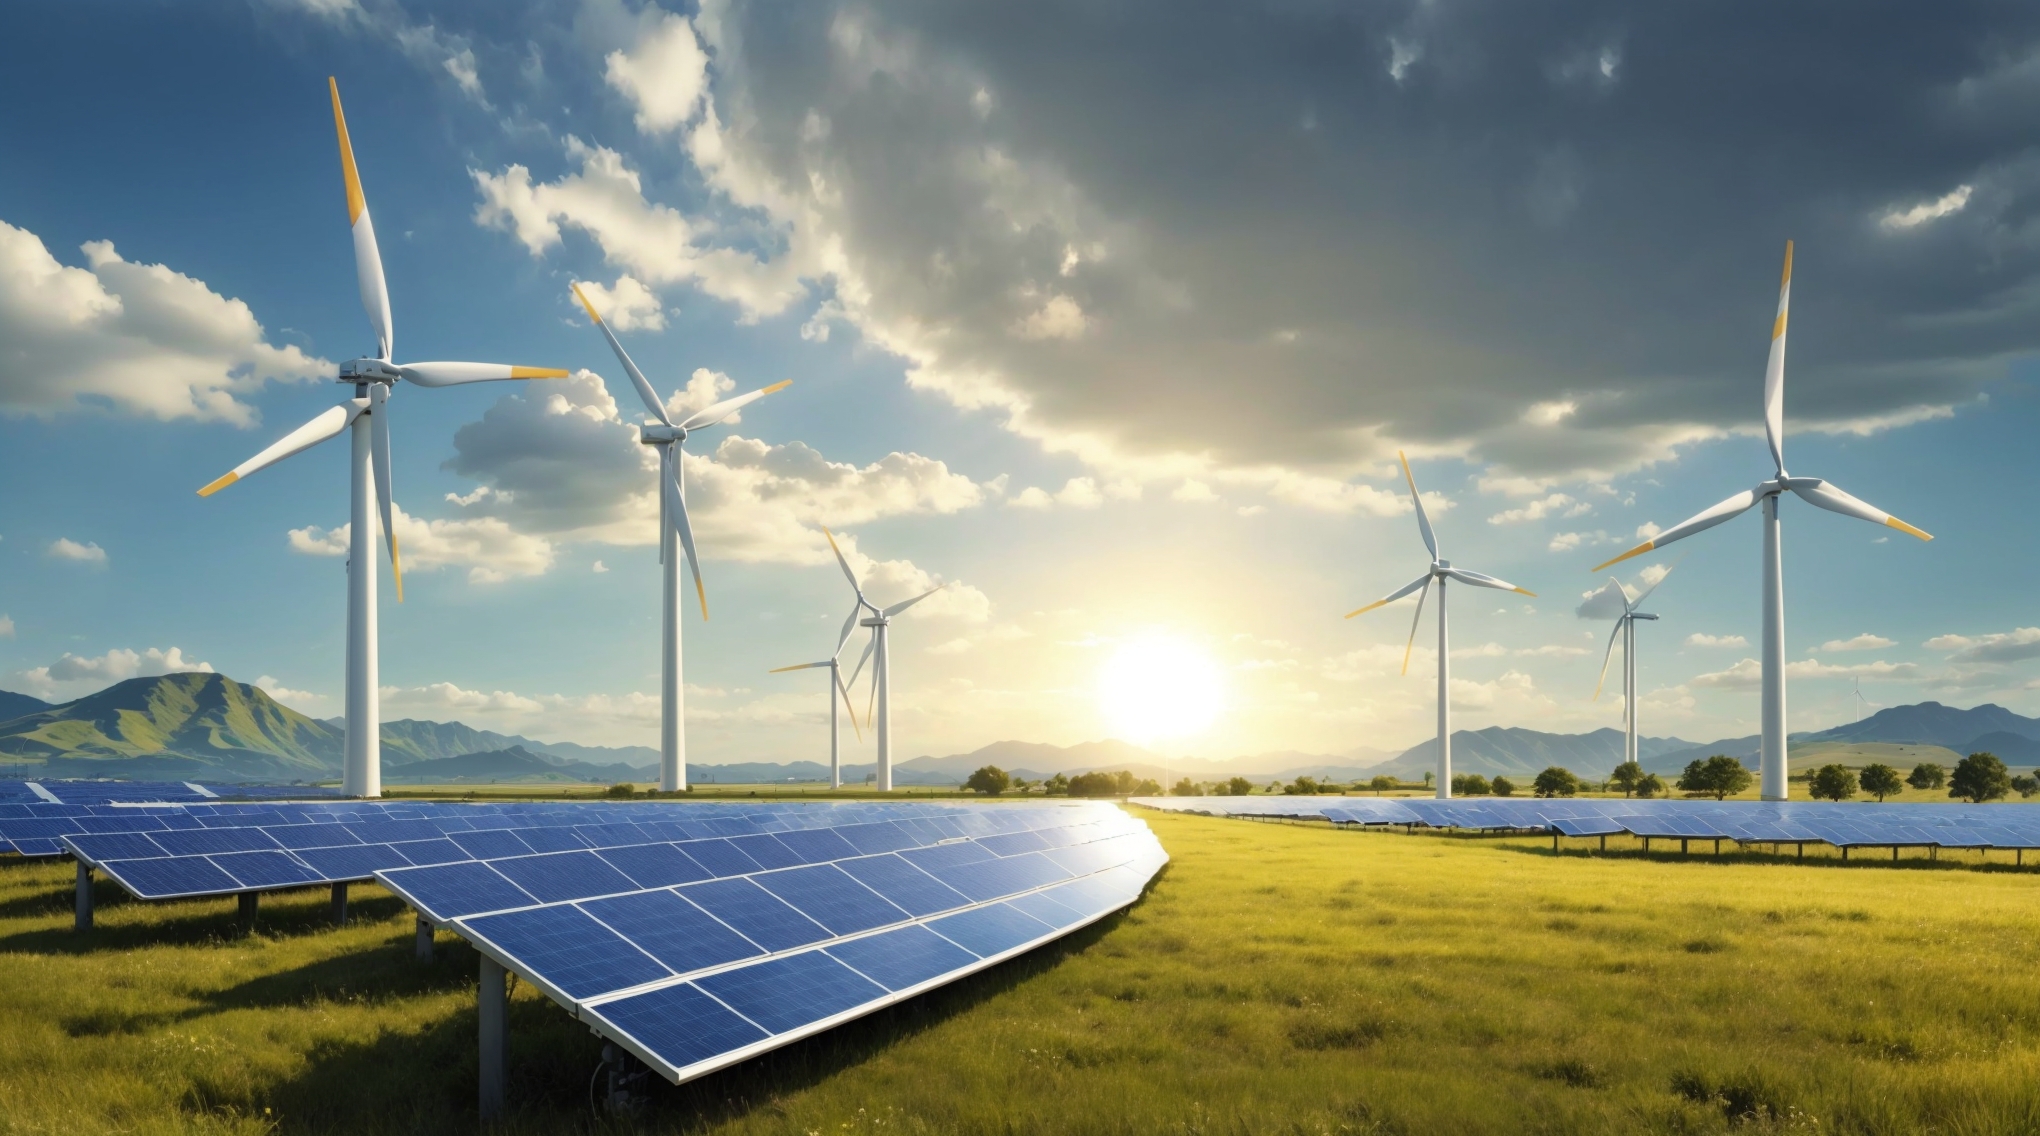 Renewable energies are a major economic breakthrough for the